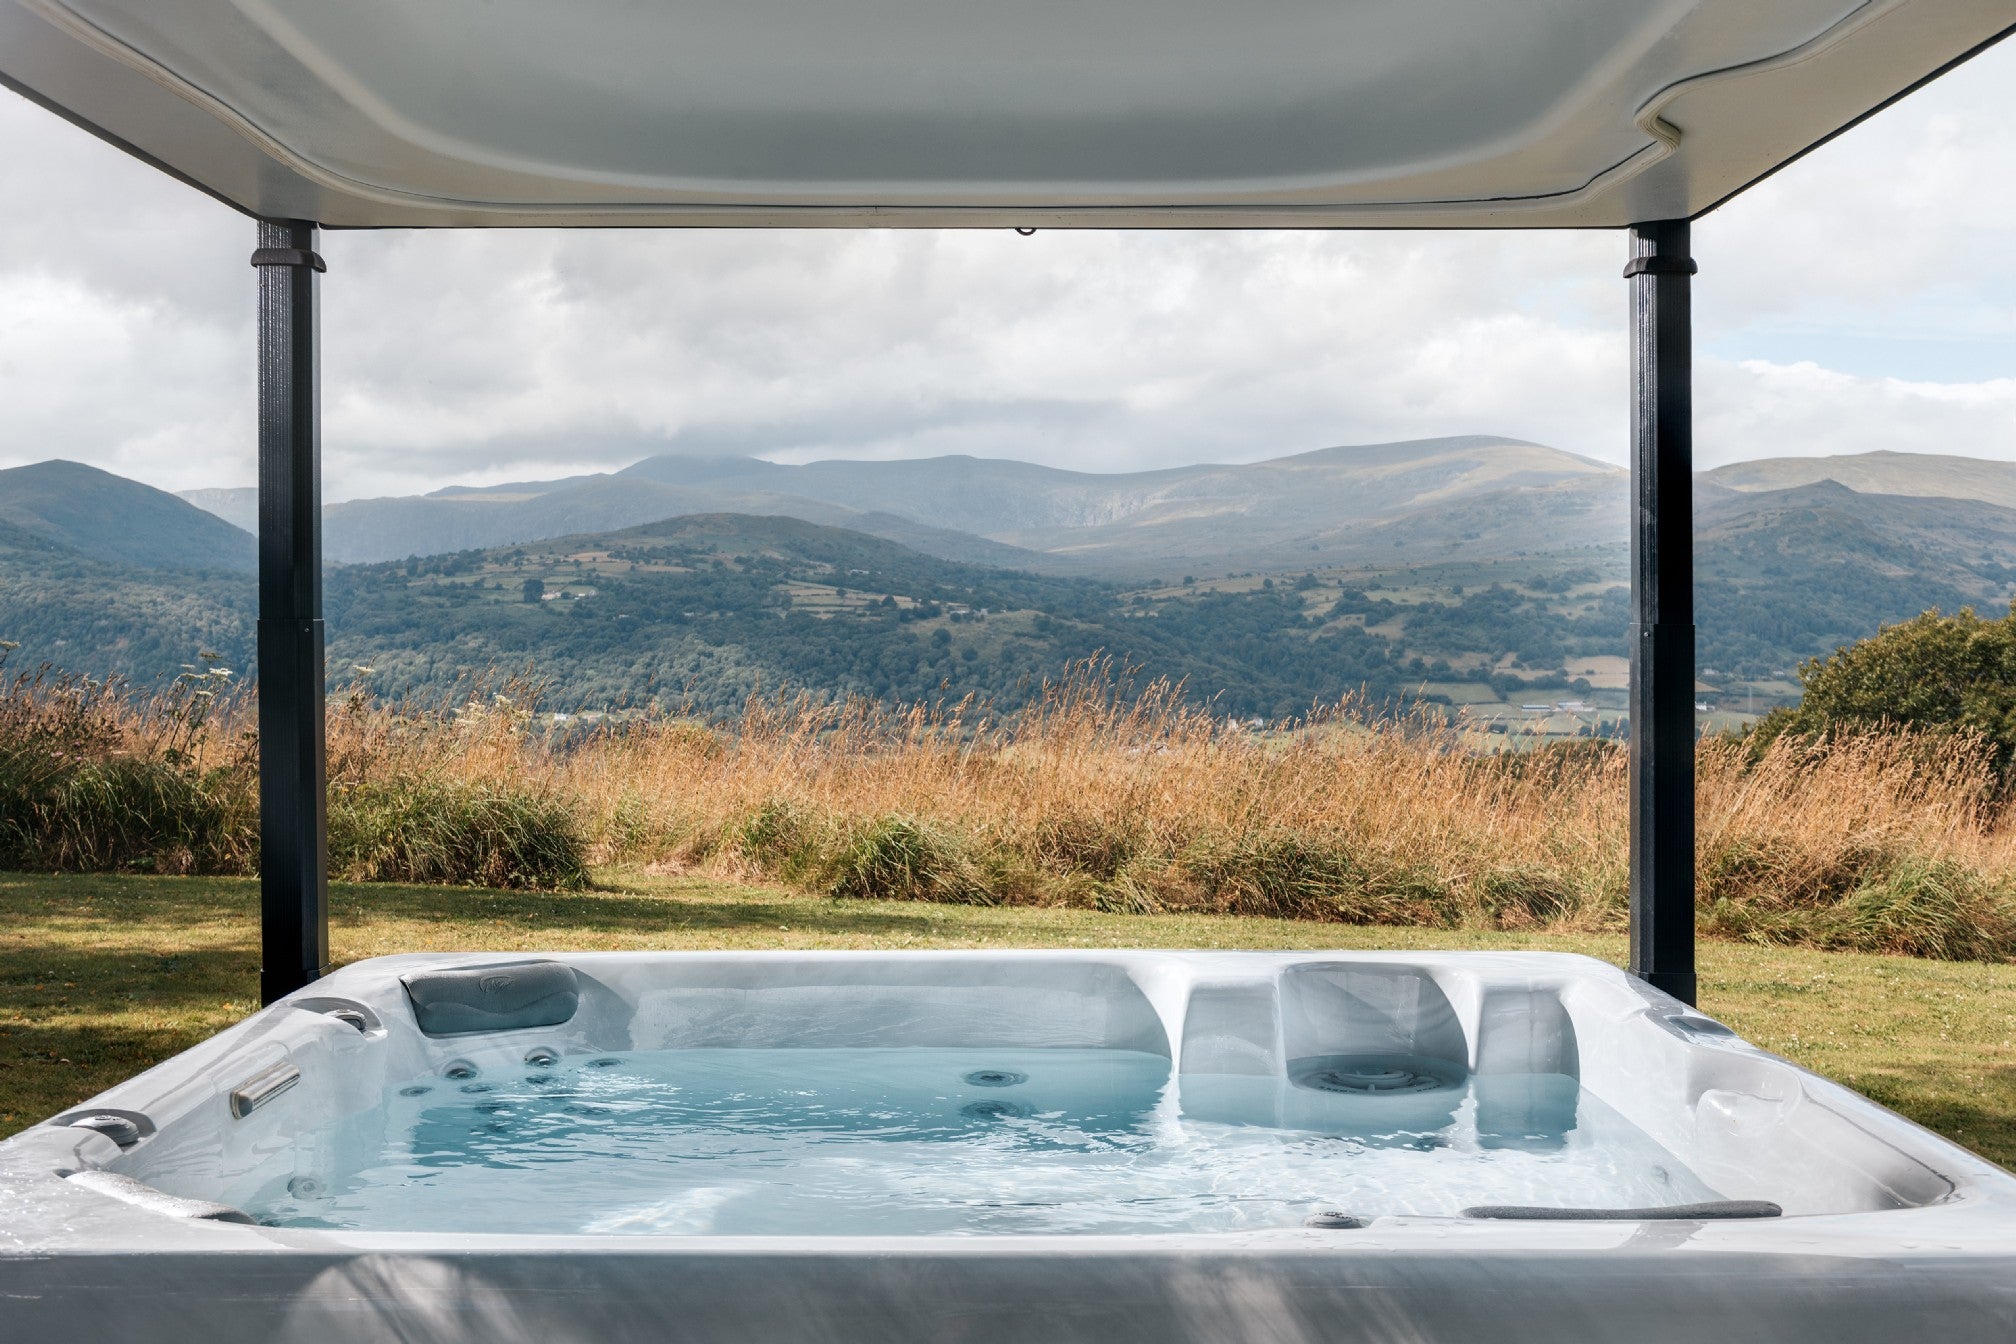 Marvel at mountain views from the luxury cabin’s hot tub